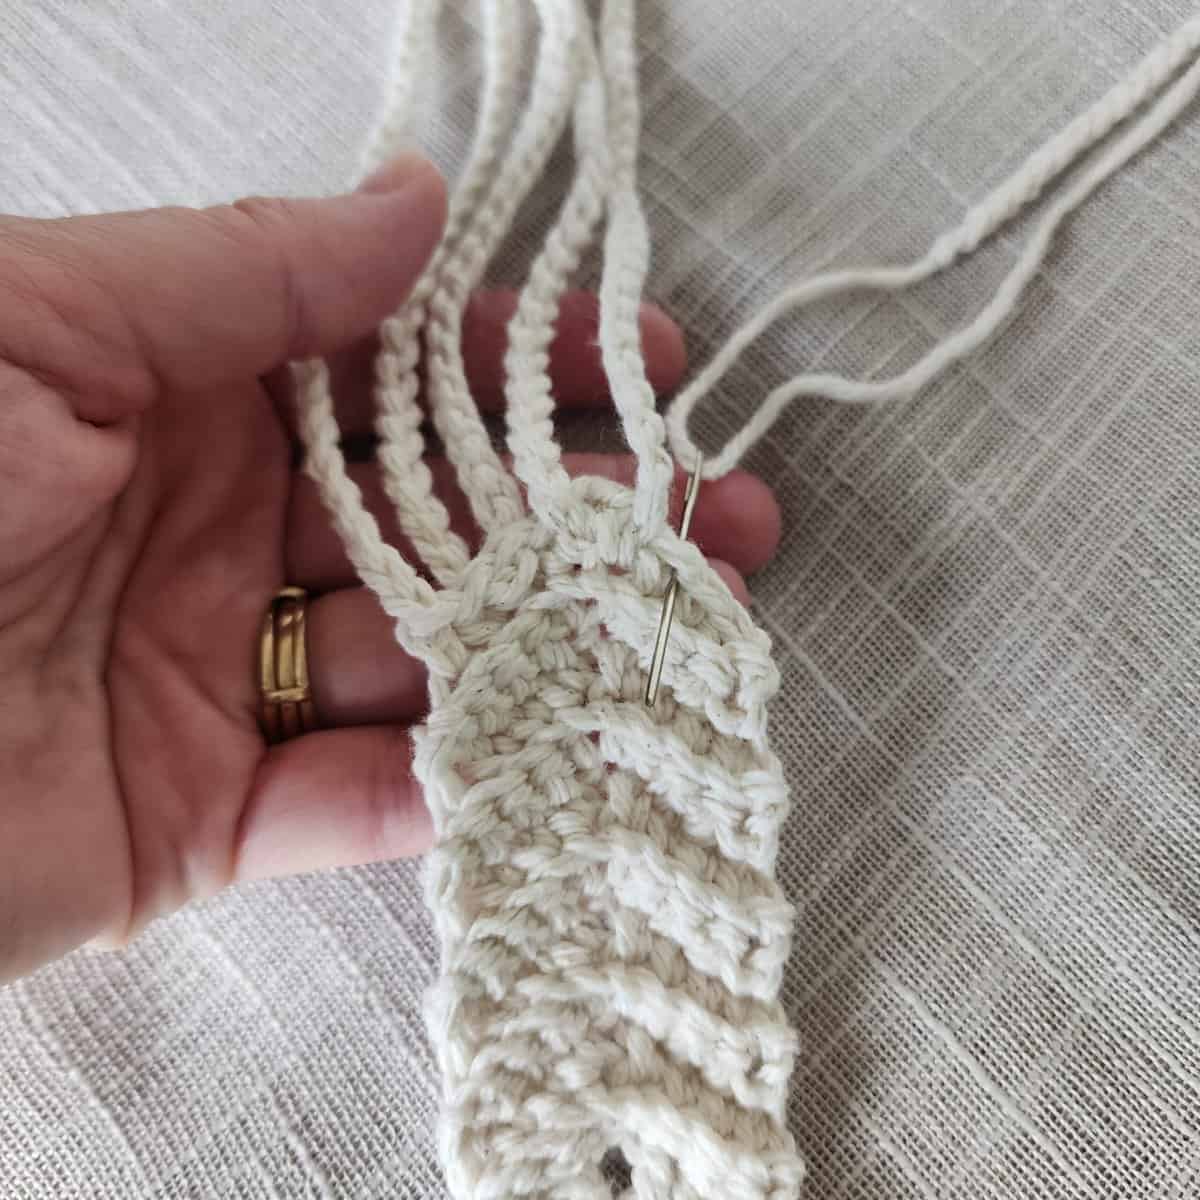 Third hanging strap being attached to hanging ring with yarn needle.